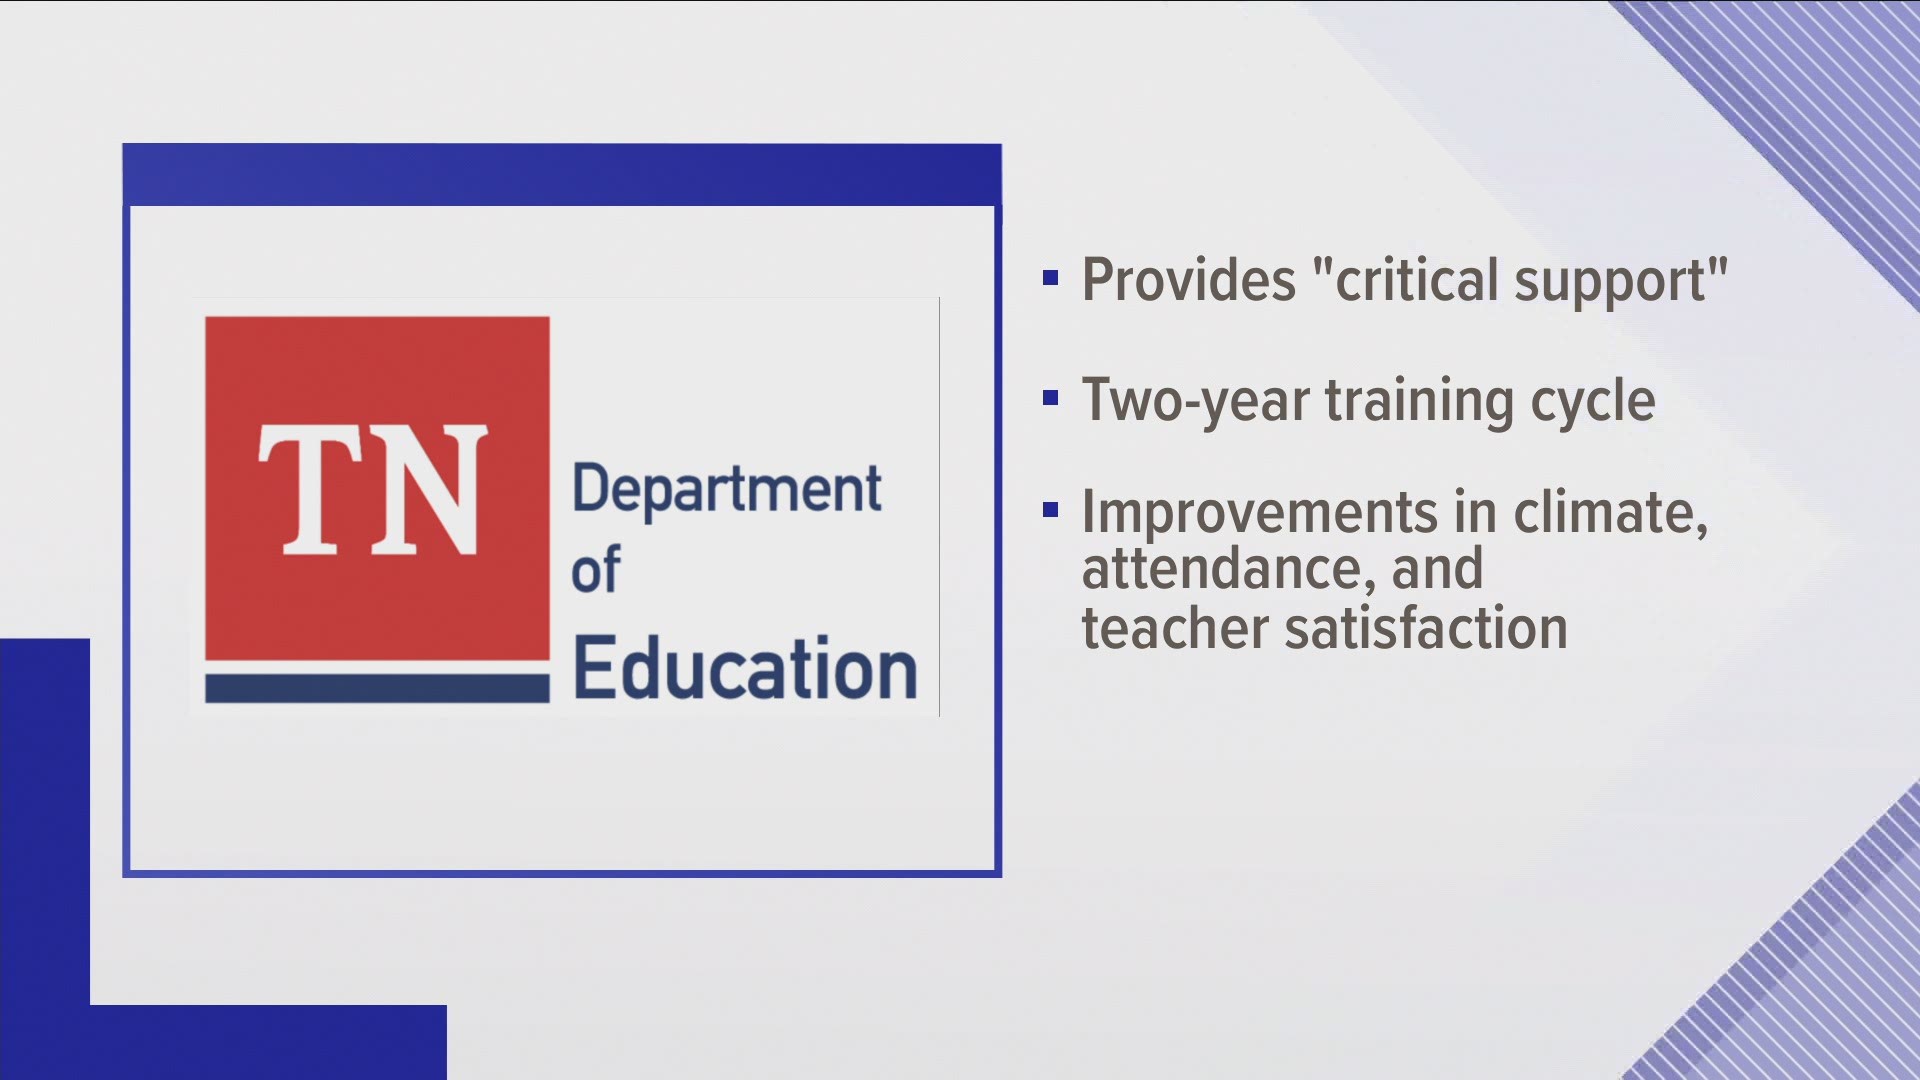 The goal is to provide "critical support" for students both academically and non-academically.